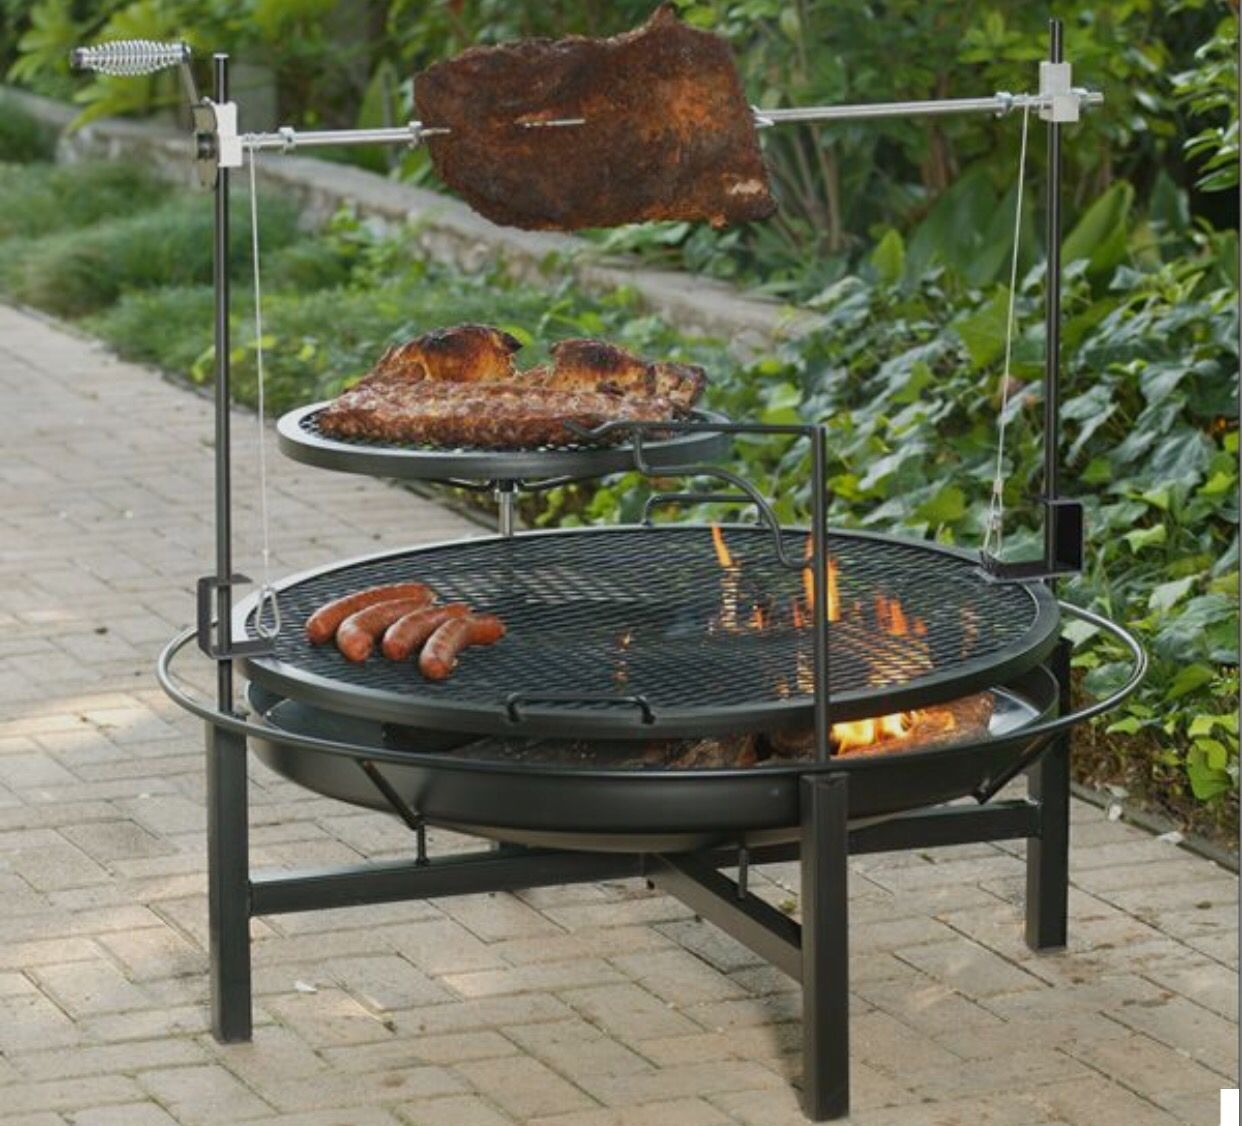 Large charcoal grills